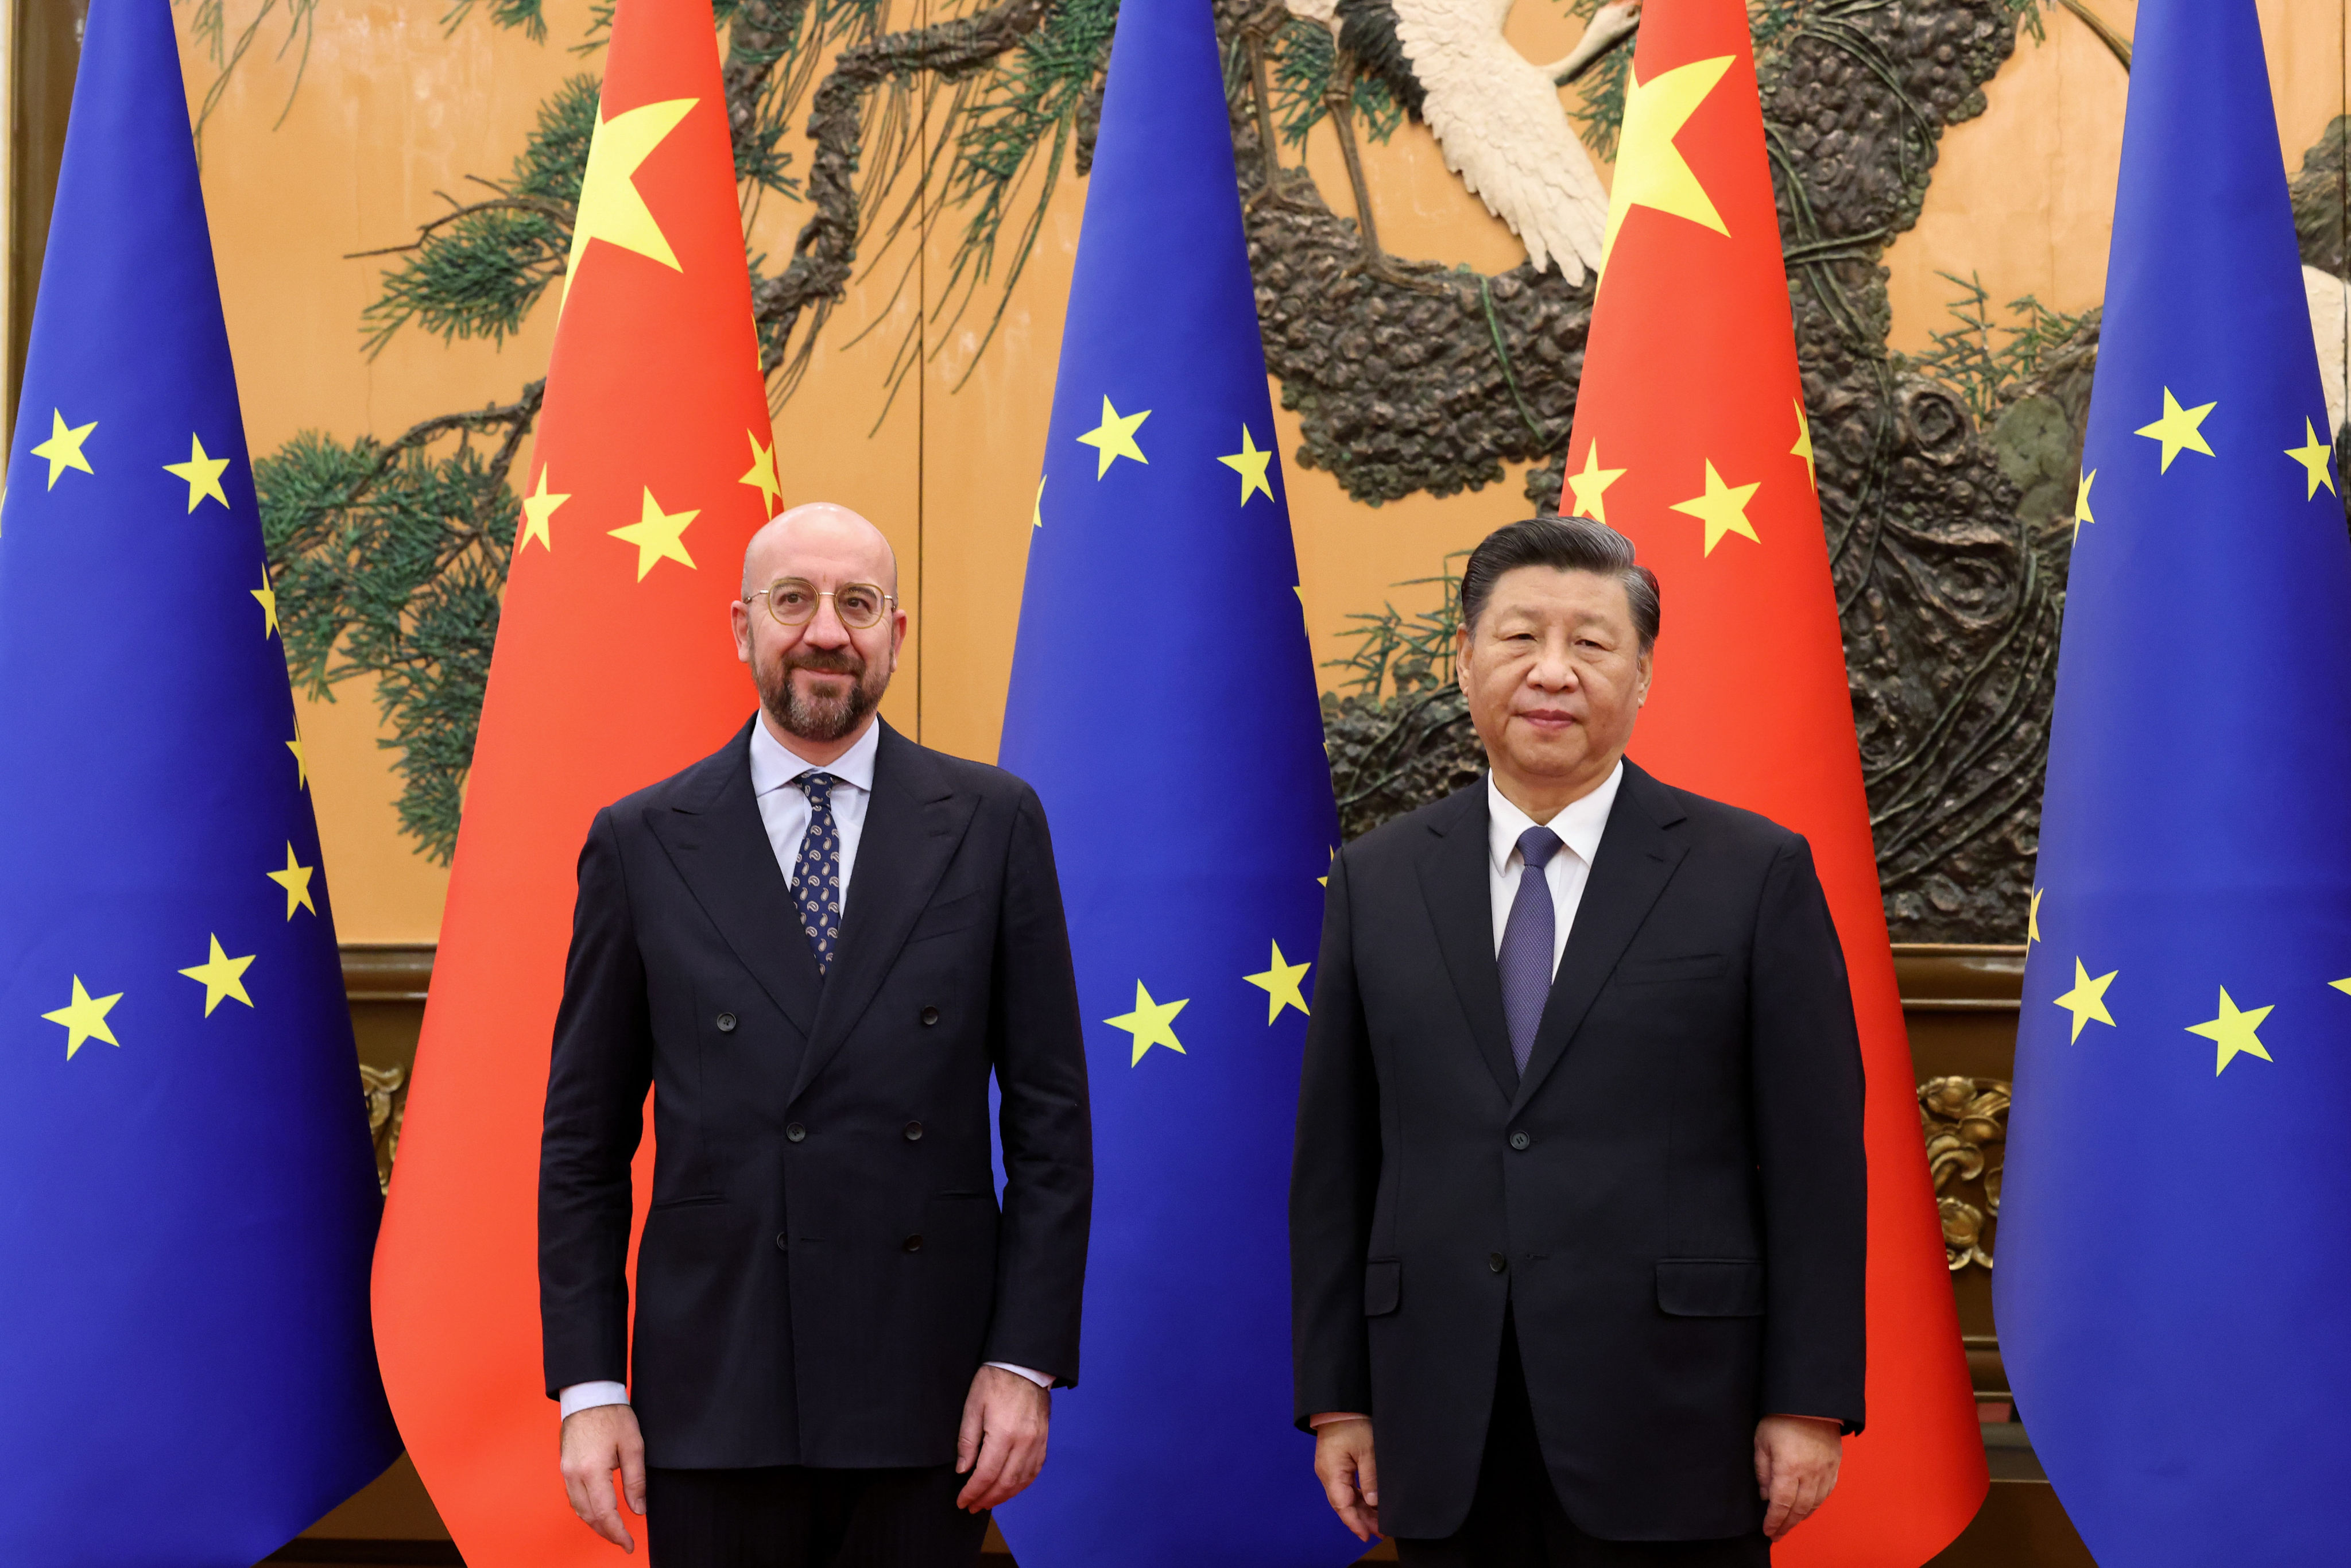 In December, Chinese President Xi Jinping received President of the European Council Charles Michel. But Michel was told last week his expected meeting with Xi on the sidelines of the G20 will not go ahead. Photo: DPA